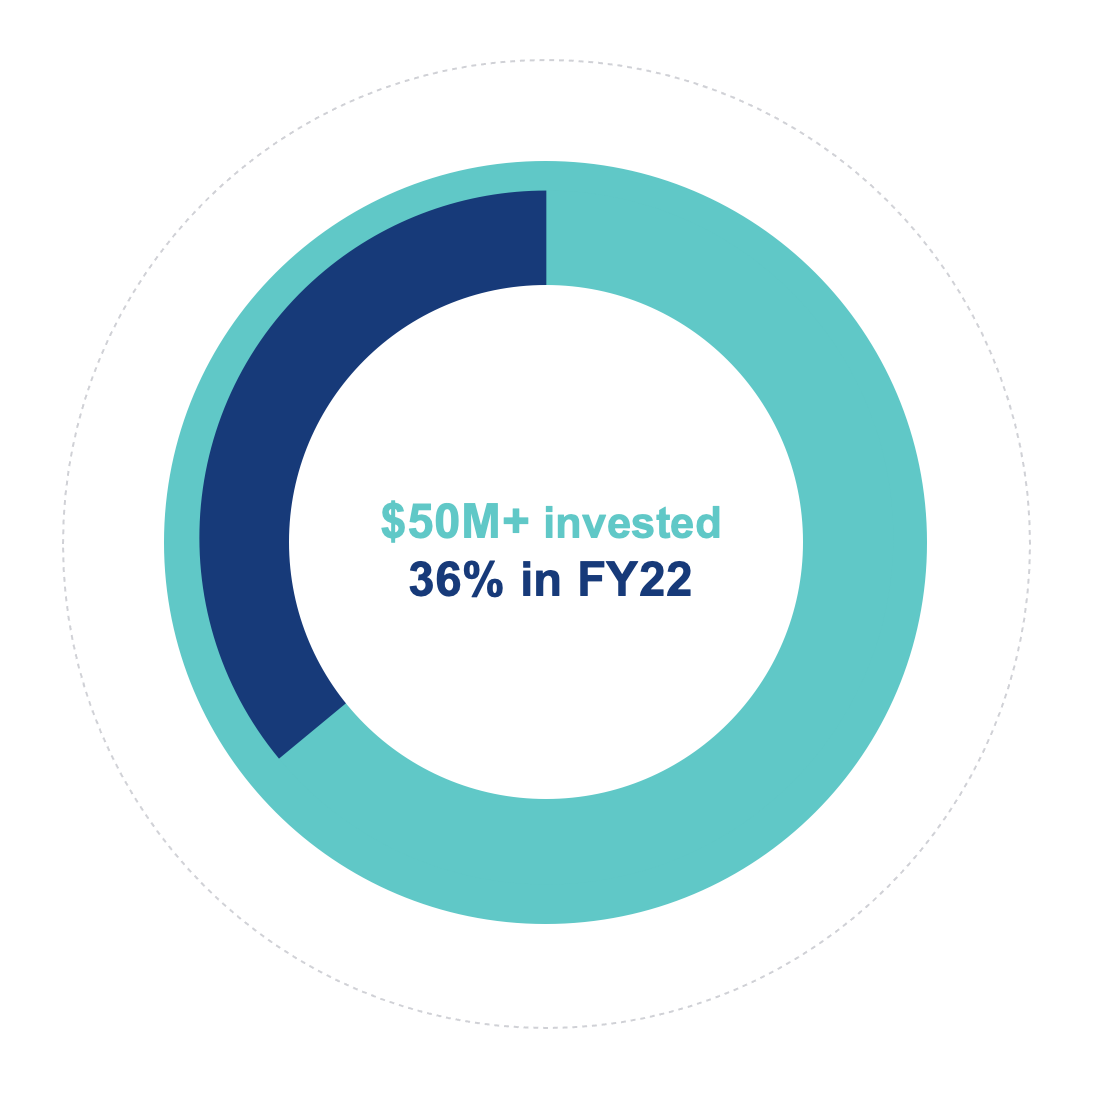 Pie chart showing Duke Capital Partners has invested over $50M in total, 36% of which came in FY22.